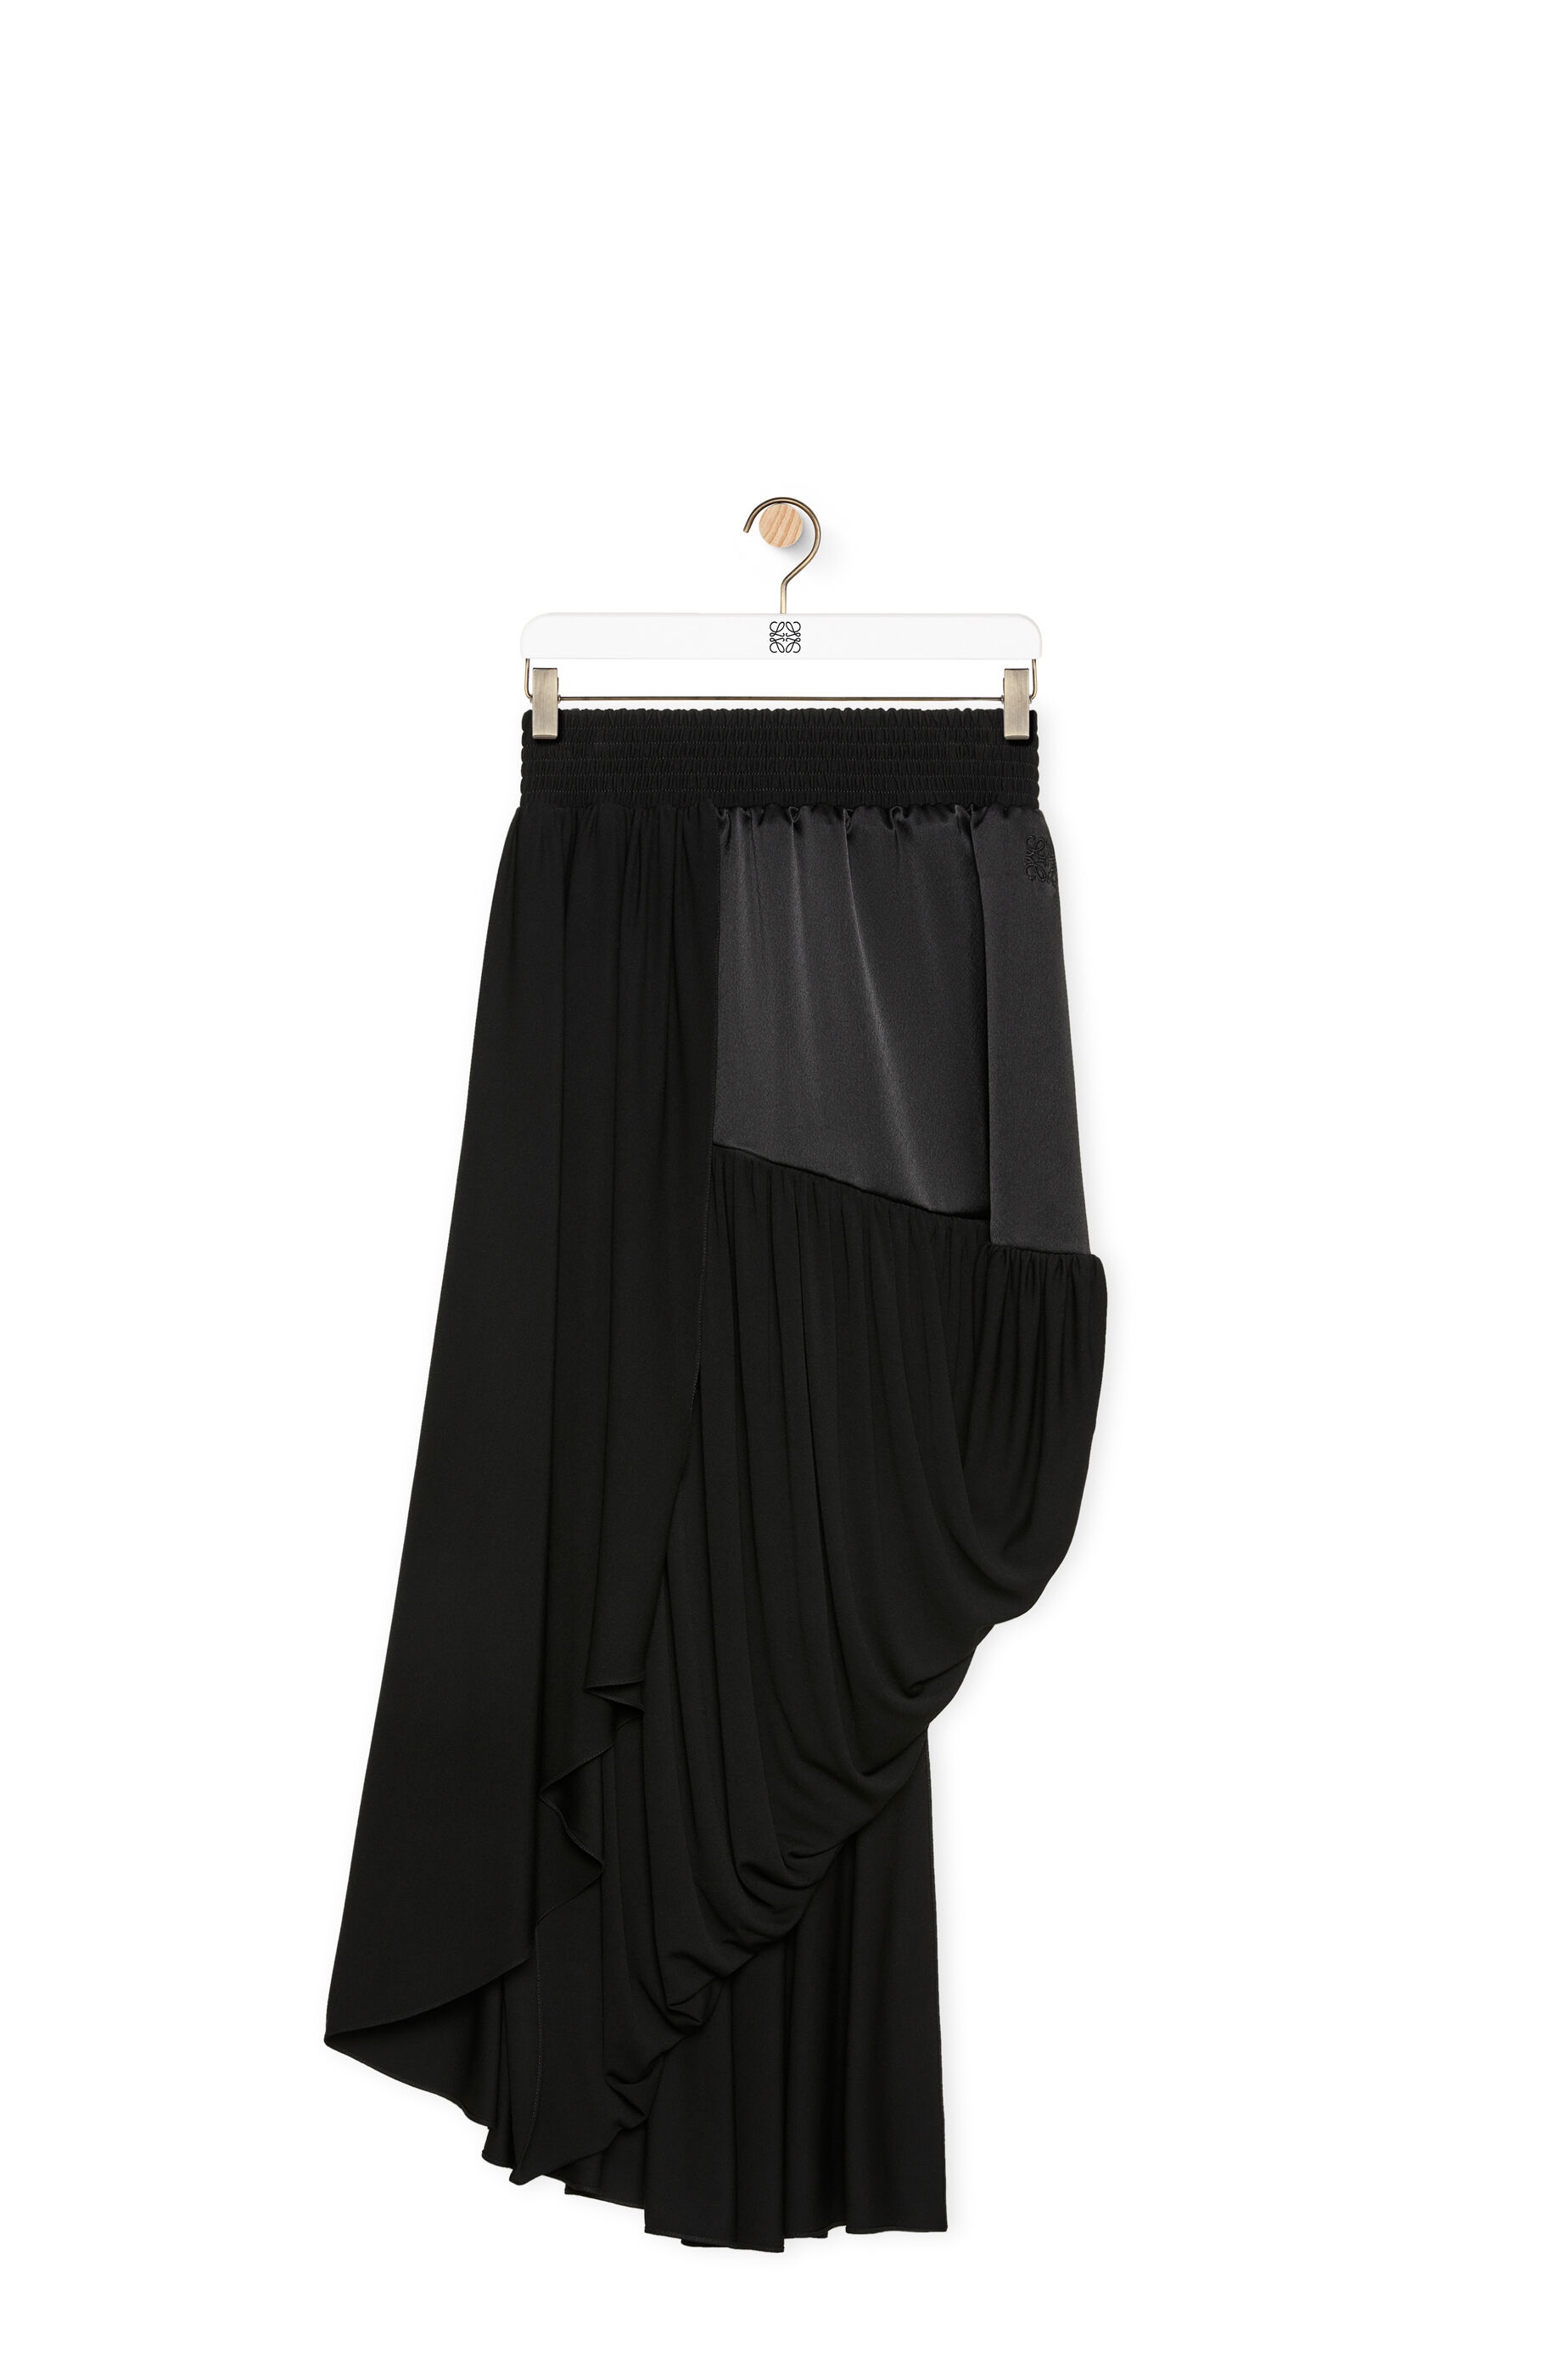 Draped skirt in crepe jersey and crepe satin - 1